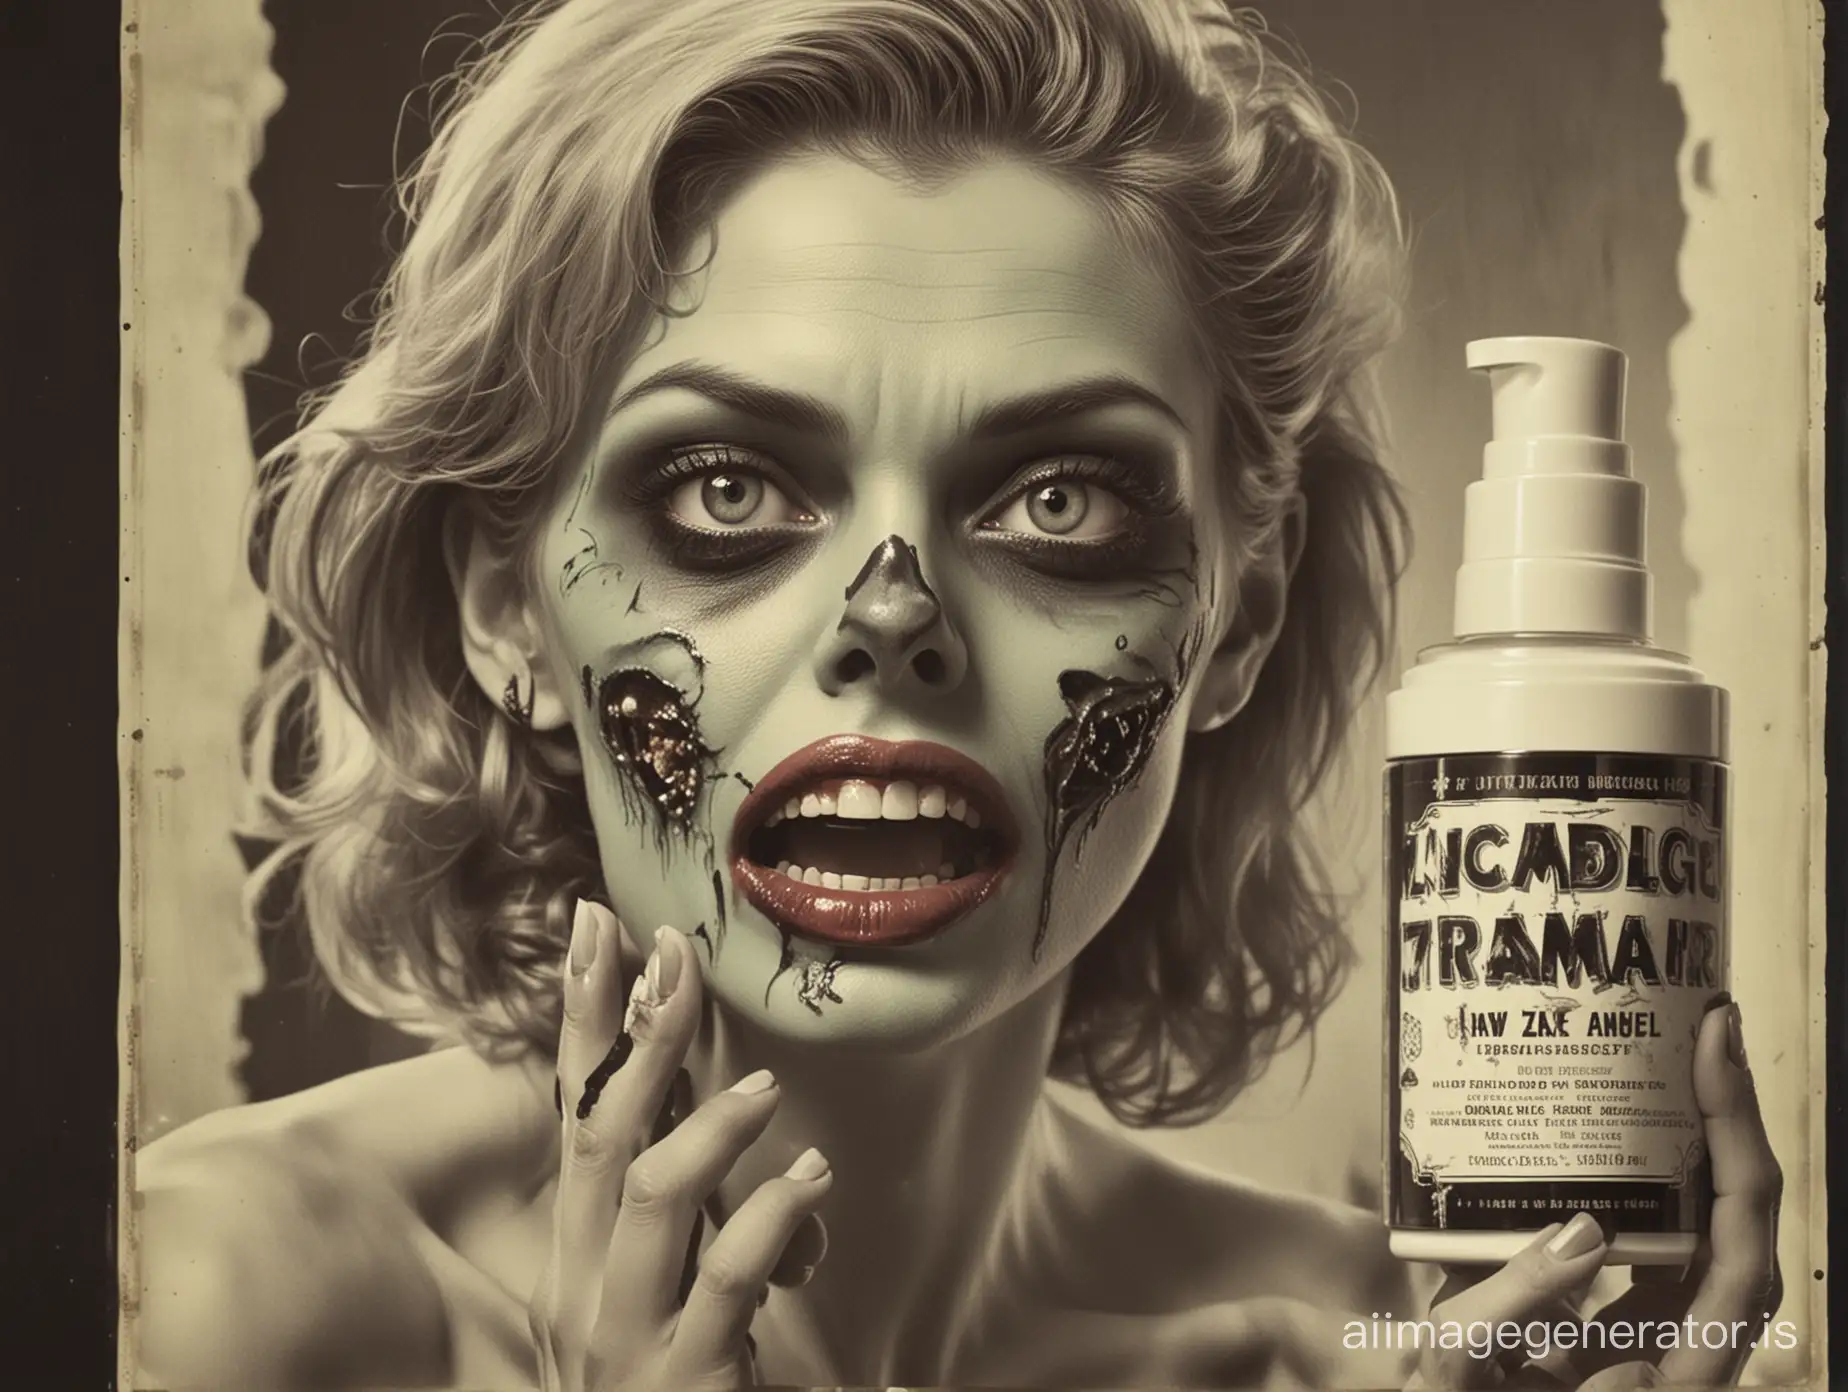 old fashion poster of a zombie model  with jaw dropped promoting a radioactive beauty cream,